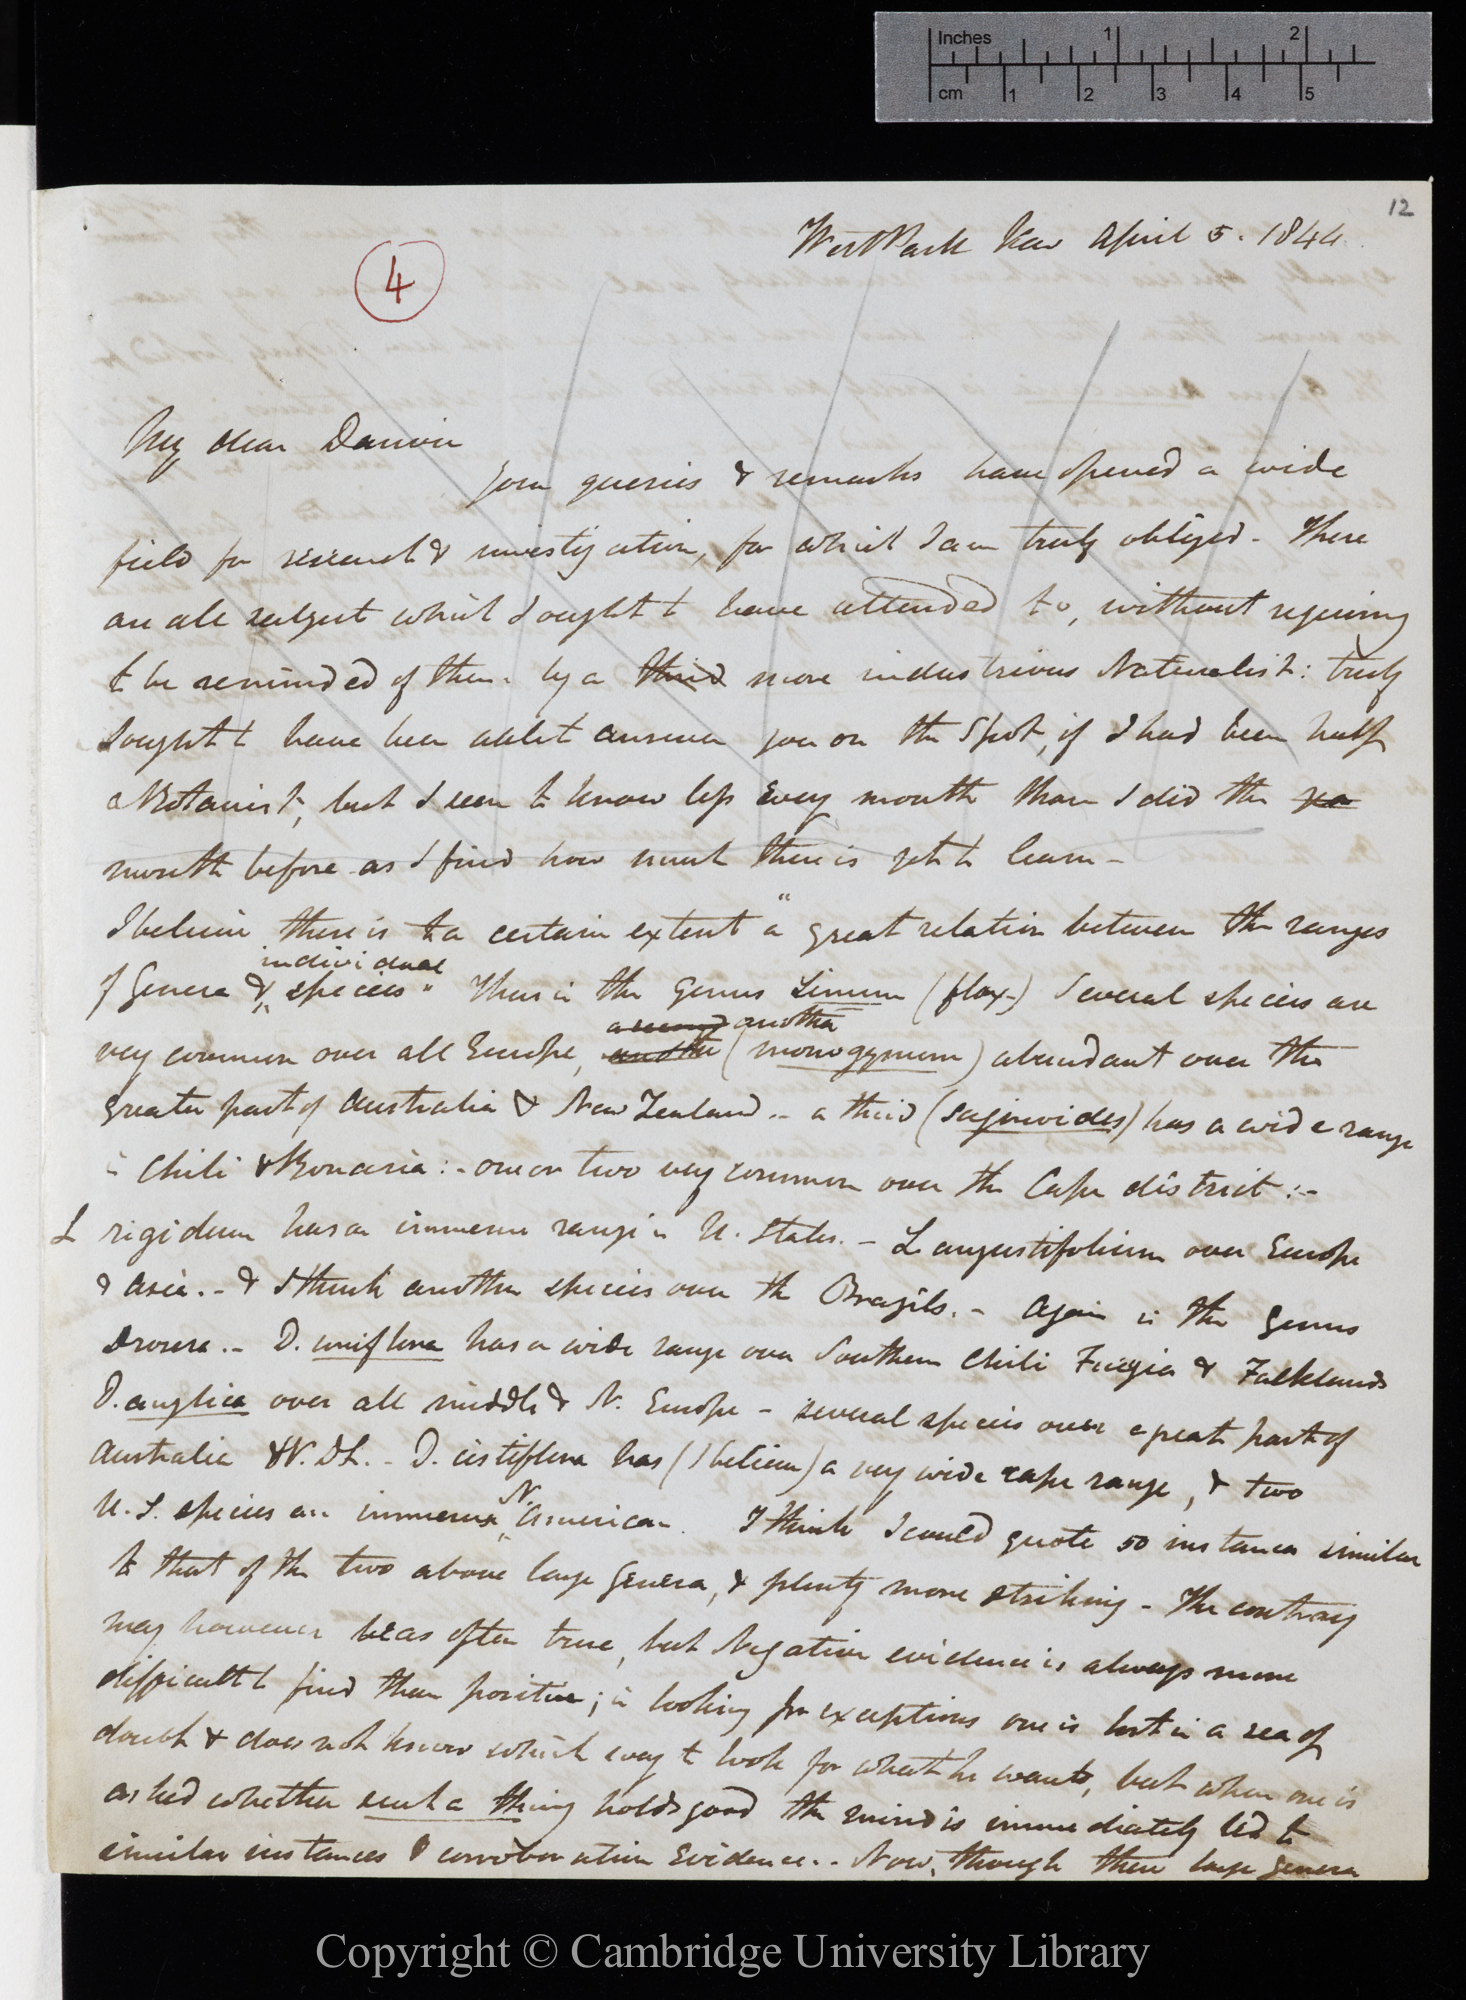 Letter from J. D. Hooker to C. R. Darwin   5 April 1844